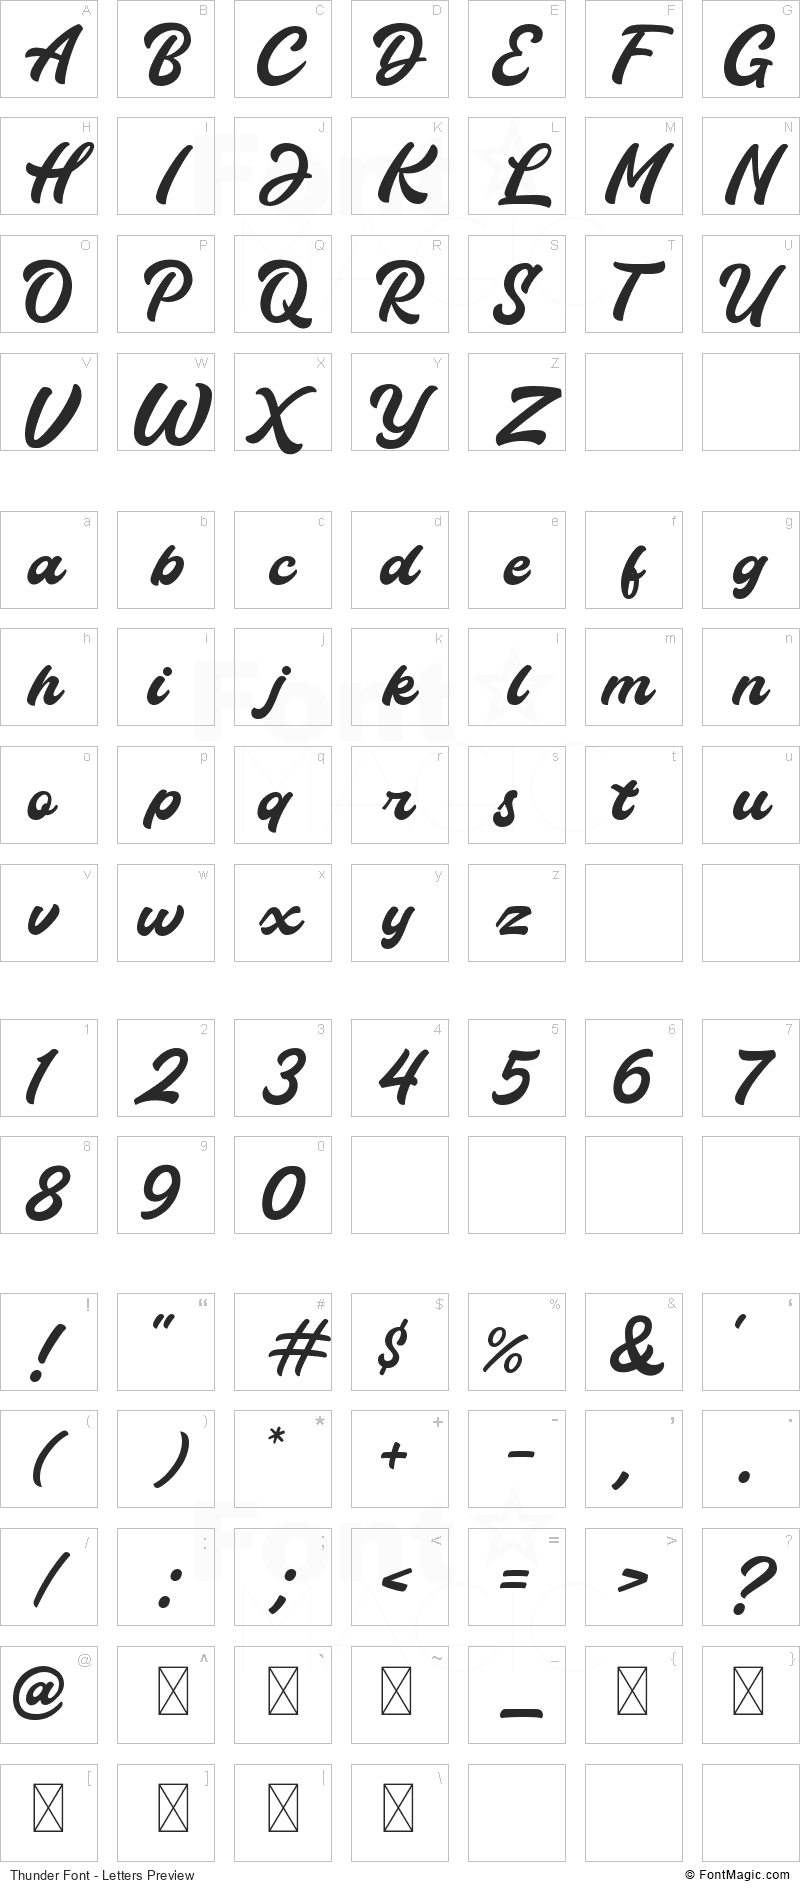 Thunder Font - All Latters Preview Chart